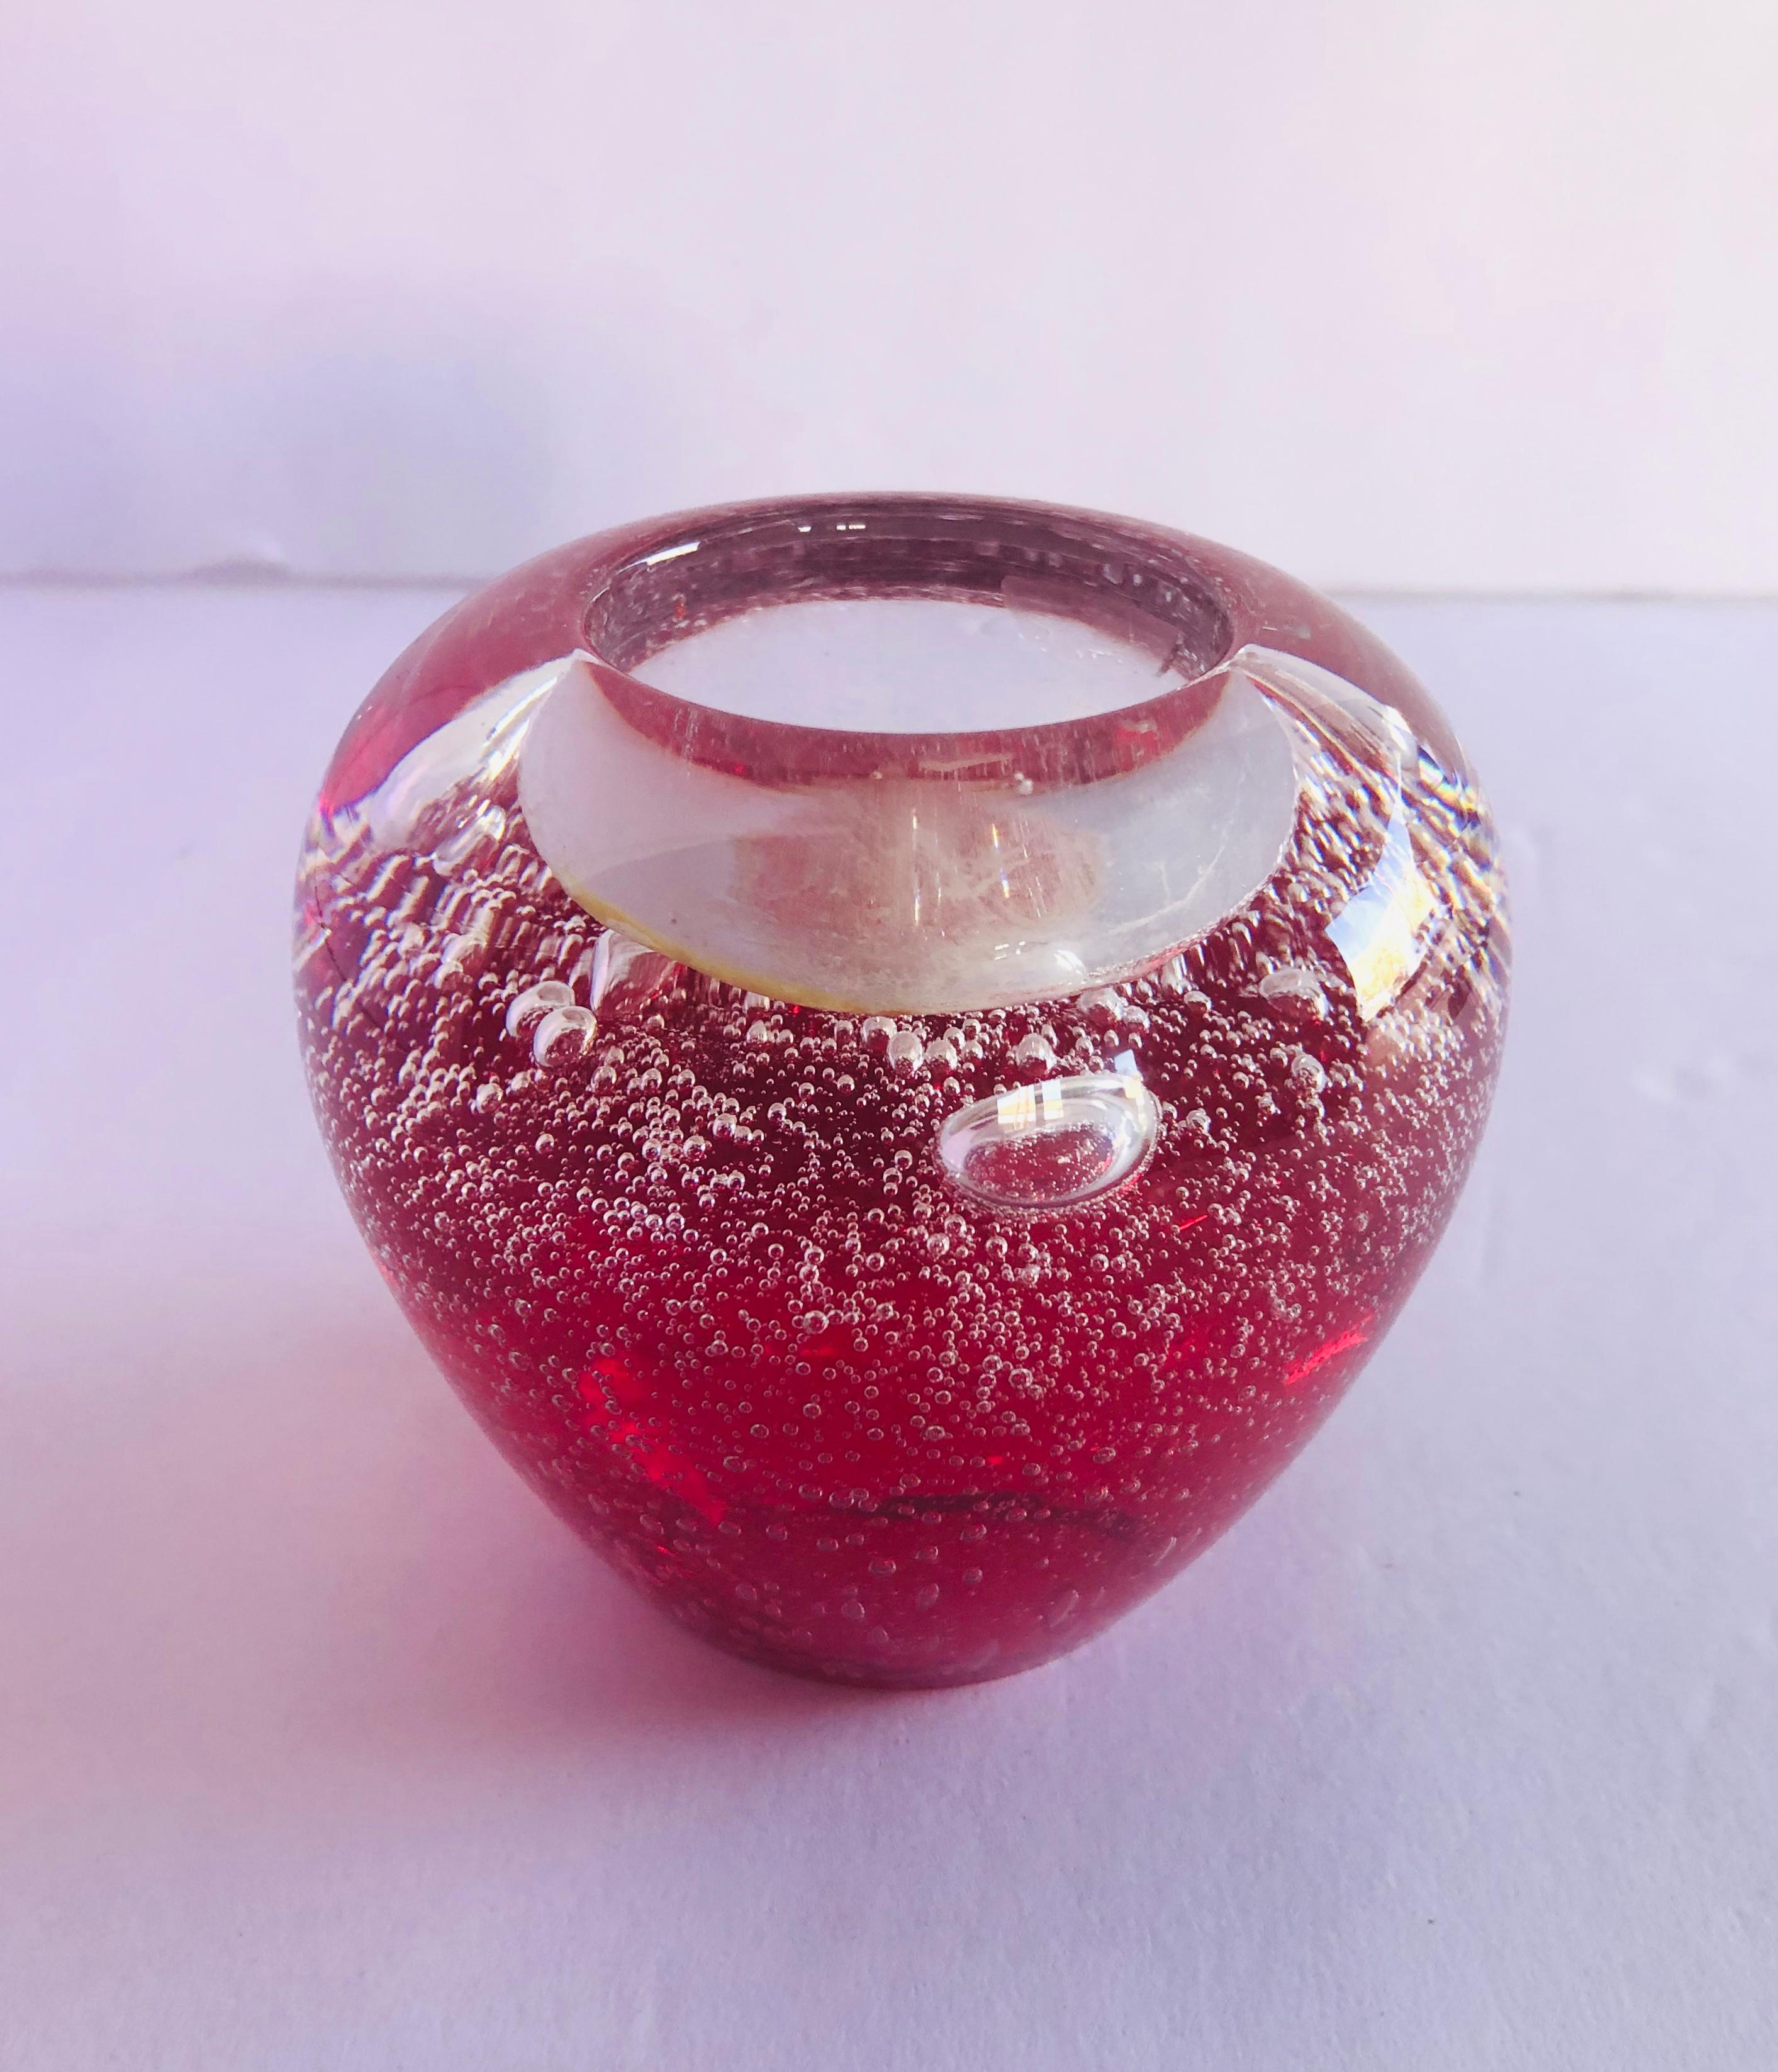 Vintage Italian red Murano glass tealight holder hand blown with bubbles inside the glass using Bollicine technique / Made in Italy, circa 1960s
Measures: Diameter 3.5 inches, height 3.25 inches
This piece makes for a great and unique gift!!!
Order